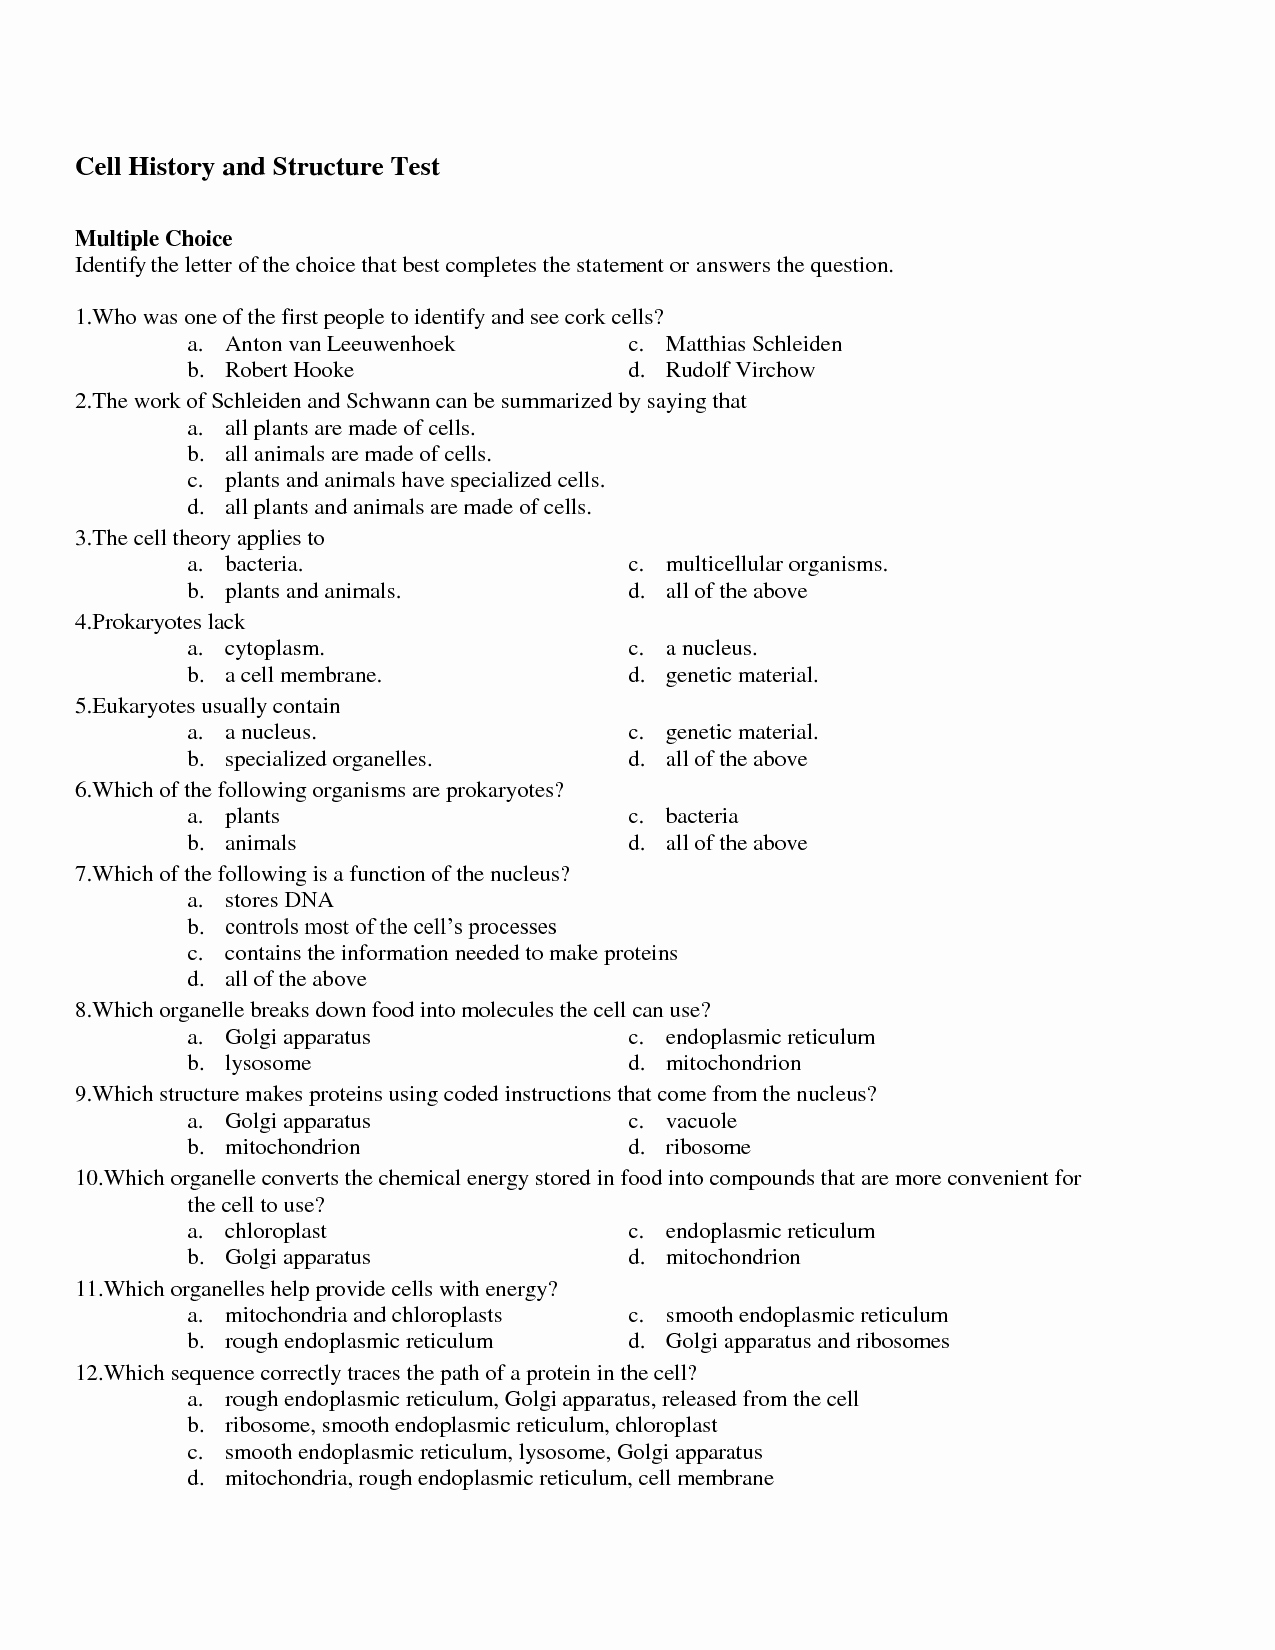 Cell organelles Worksheet Answer Key Best Of 14 Best Of Cell Structure and Function Worksheet